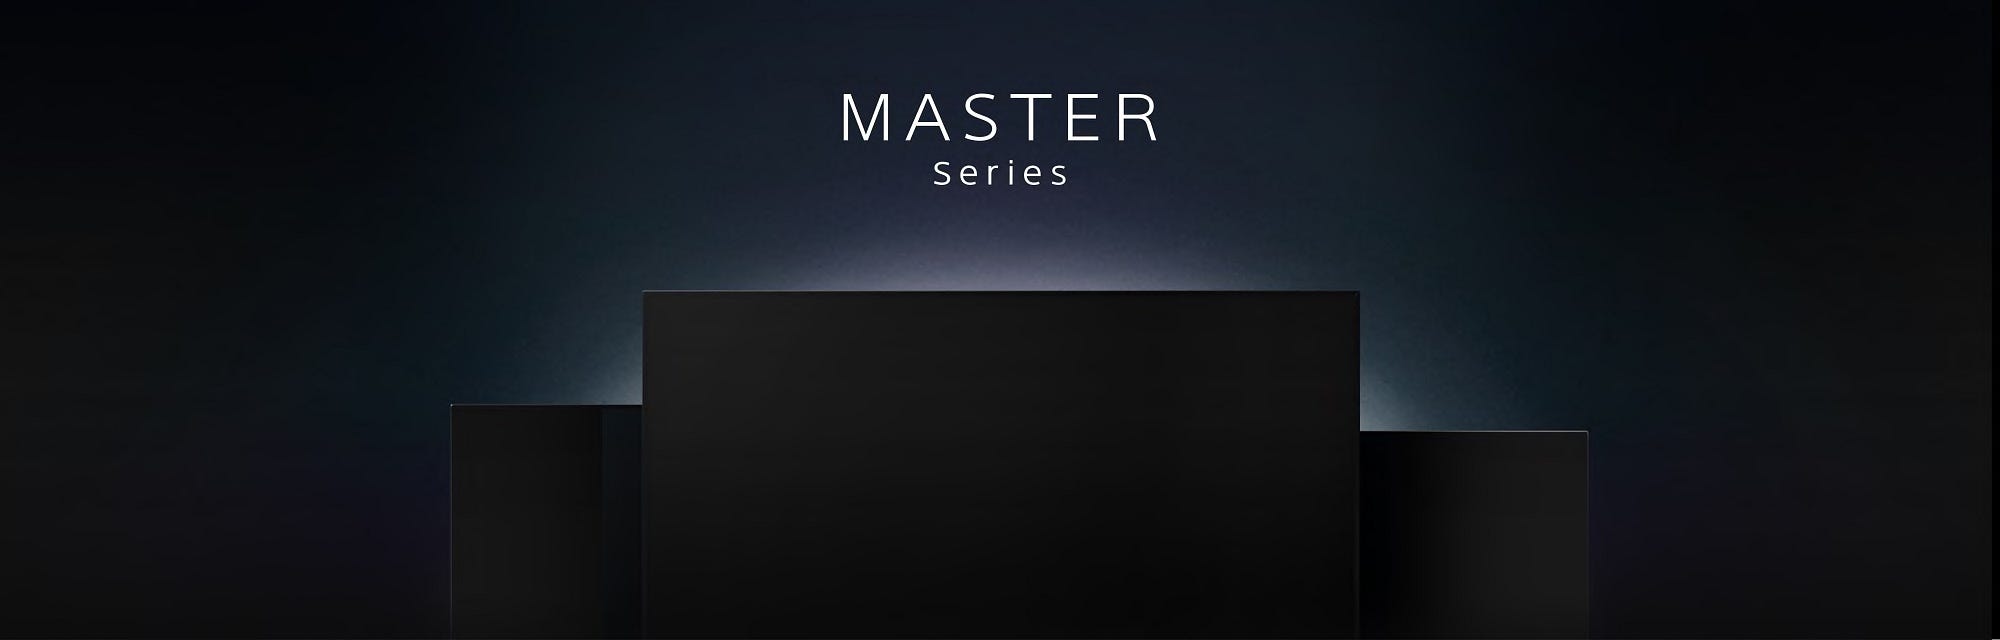 Sony Master Series 4K TVs announced Sony Reconsidered